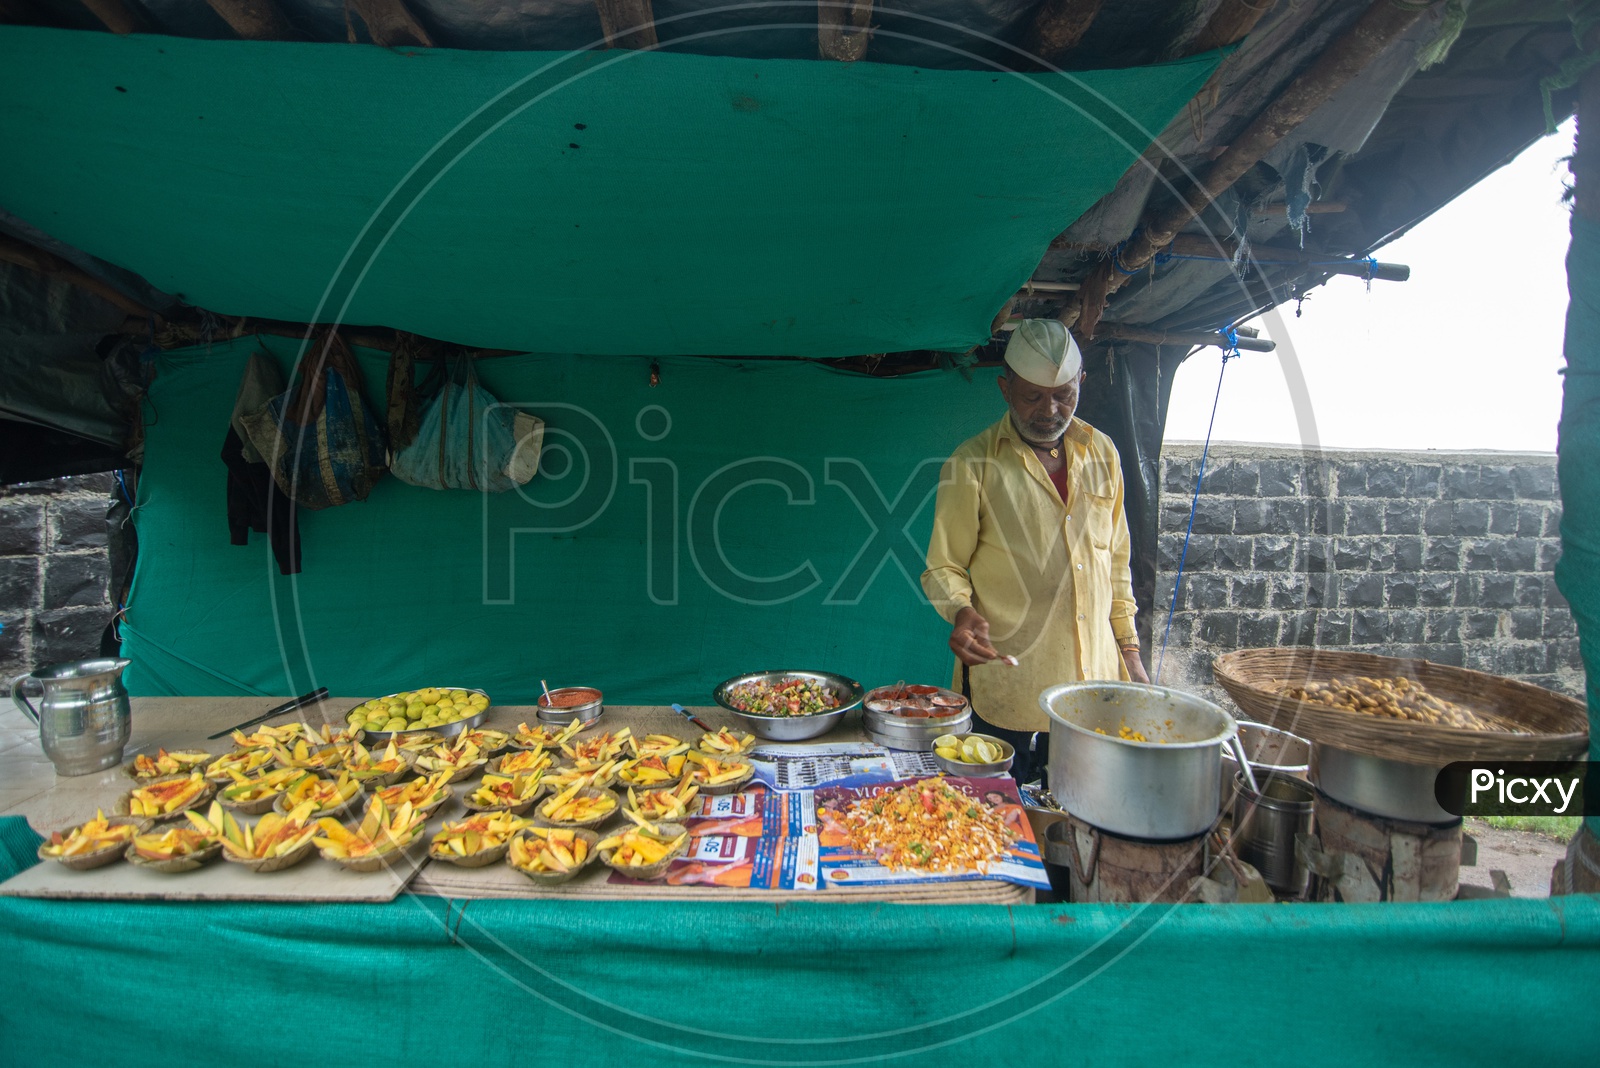 Vendor selling mangoes, peanuts and other food items at Sinhagad Fort